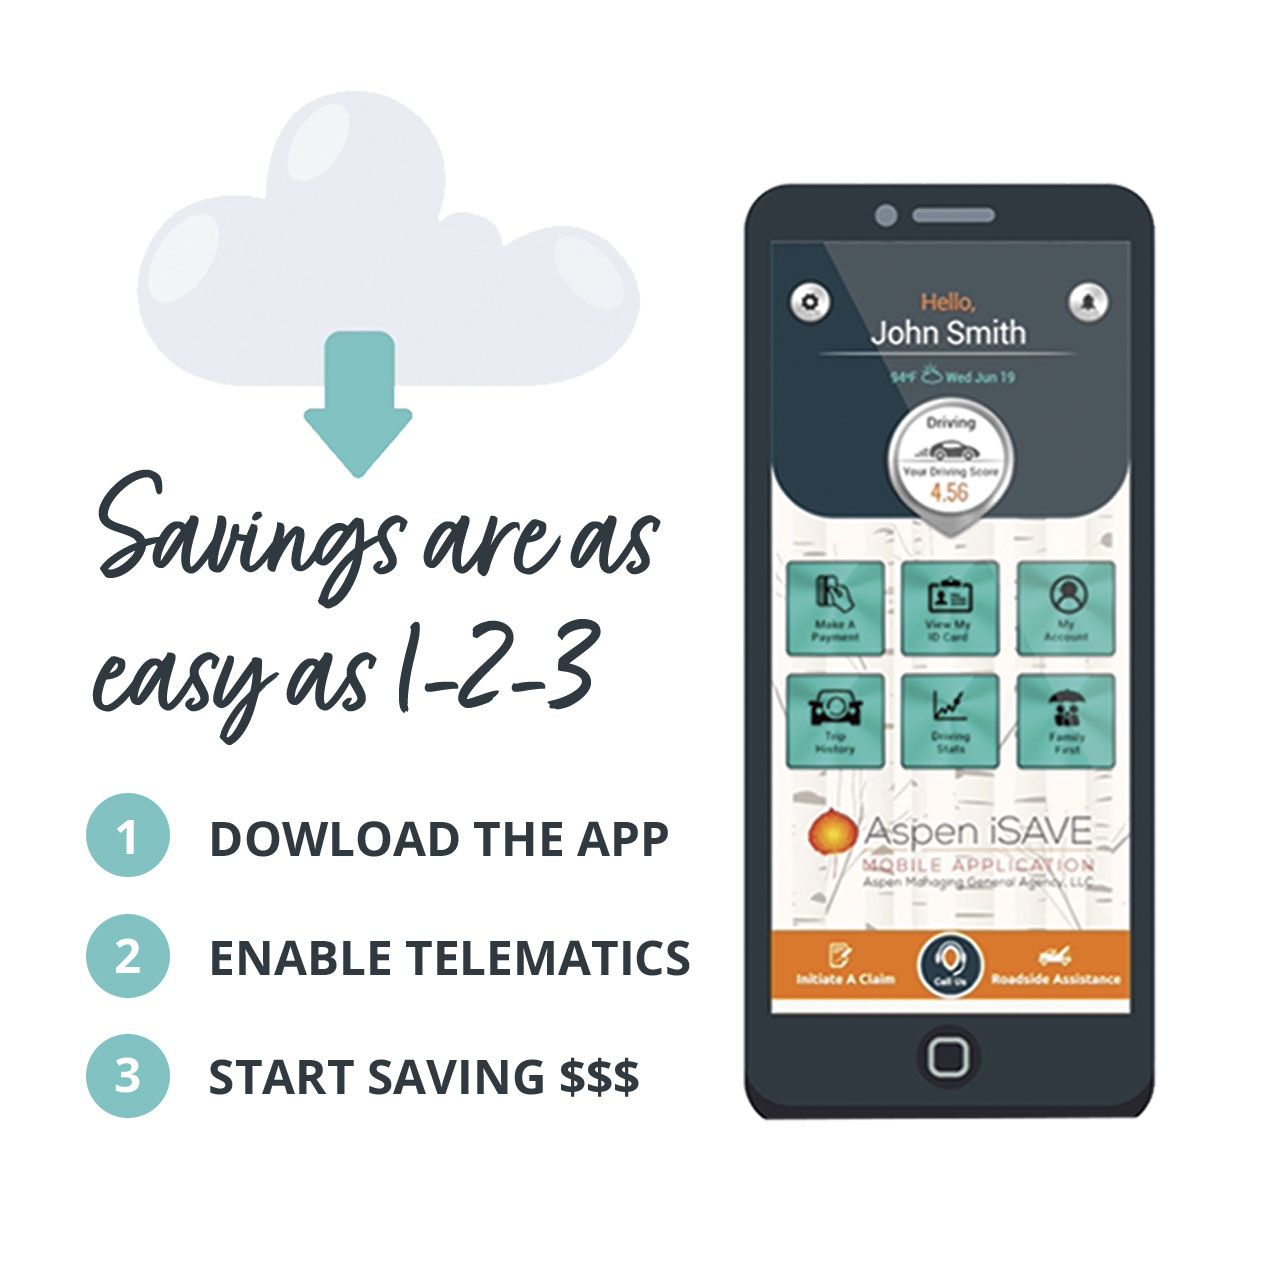 Savings are as easy as 1-2-3. 1) Download the app 2) Enable telematics 3) Start saving $$$